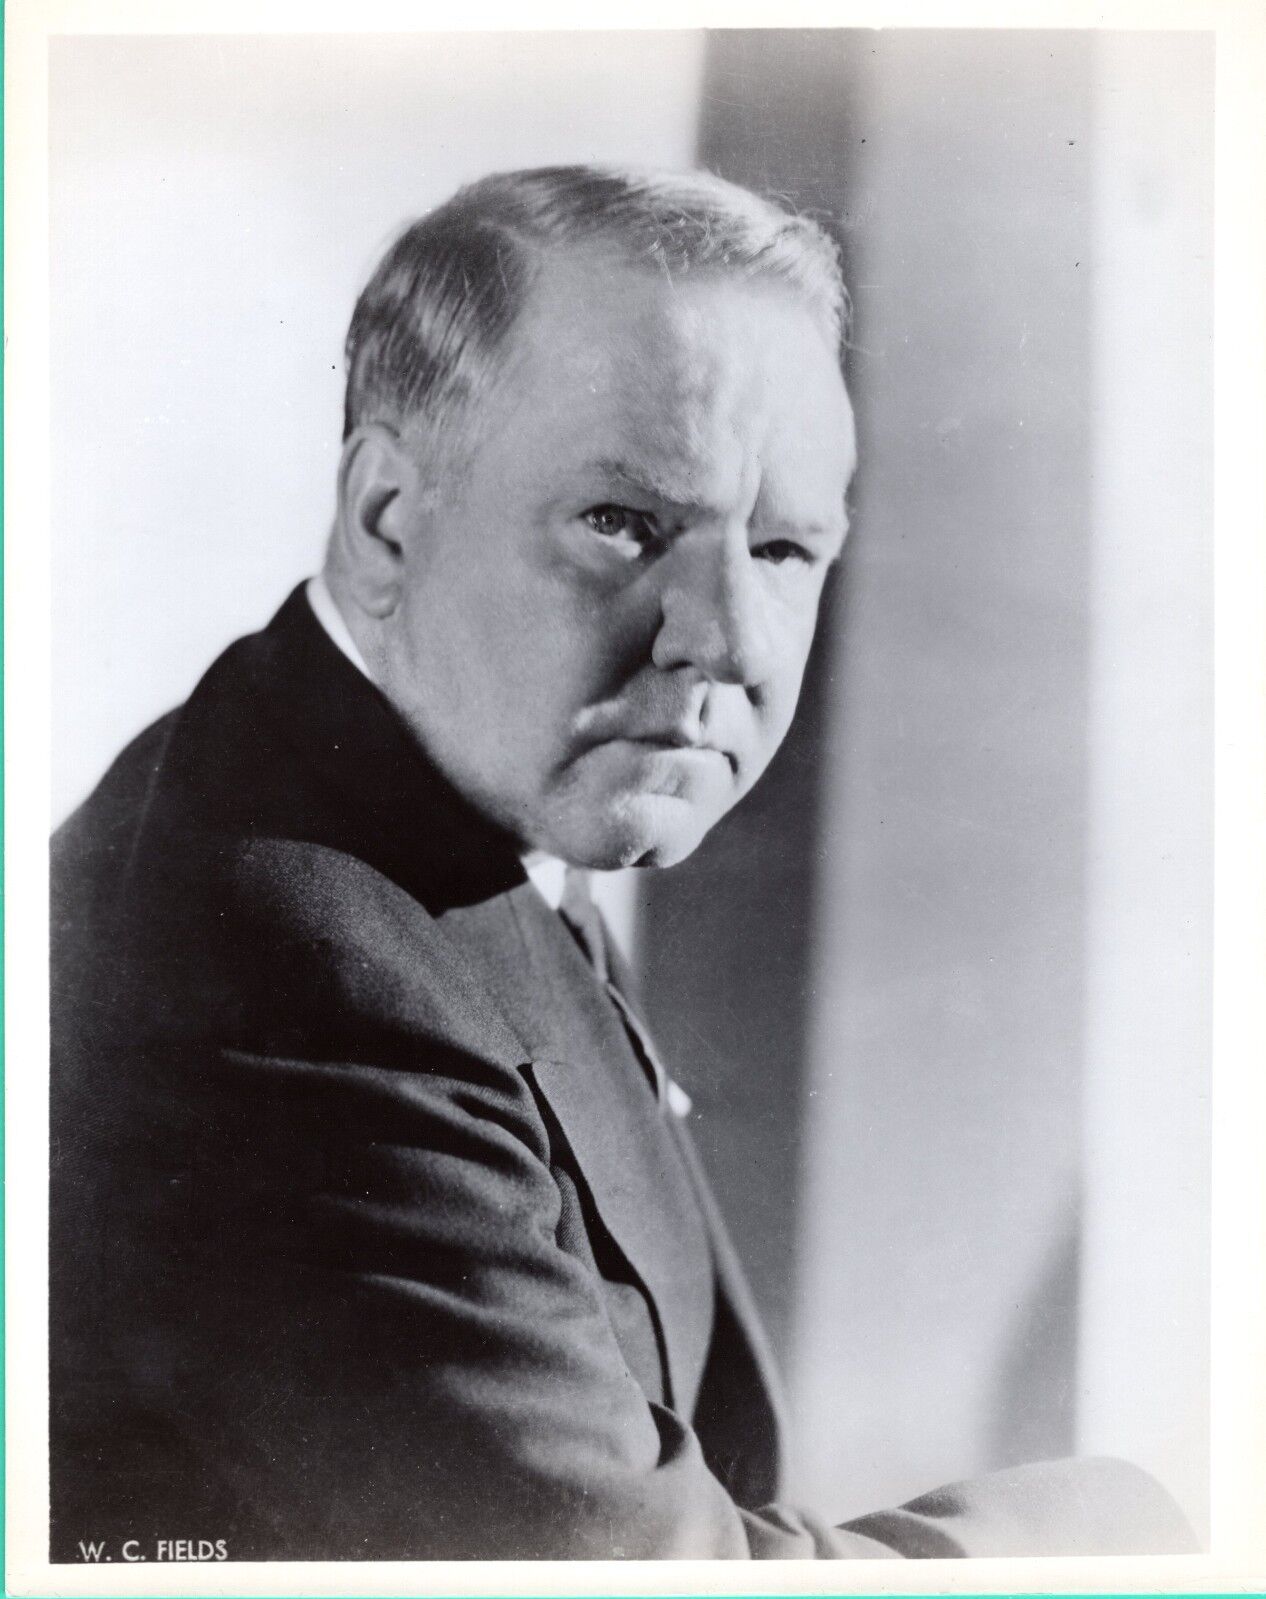 W. C. FIELDS Actor Comedian Movie Star Promo 1930's Vintage Photo Poster painting 8x10